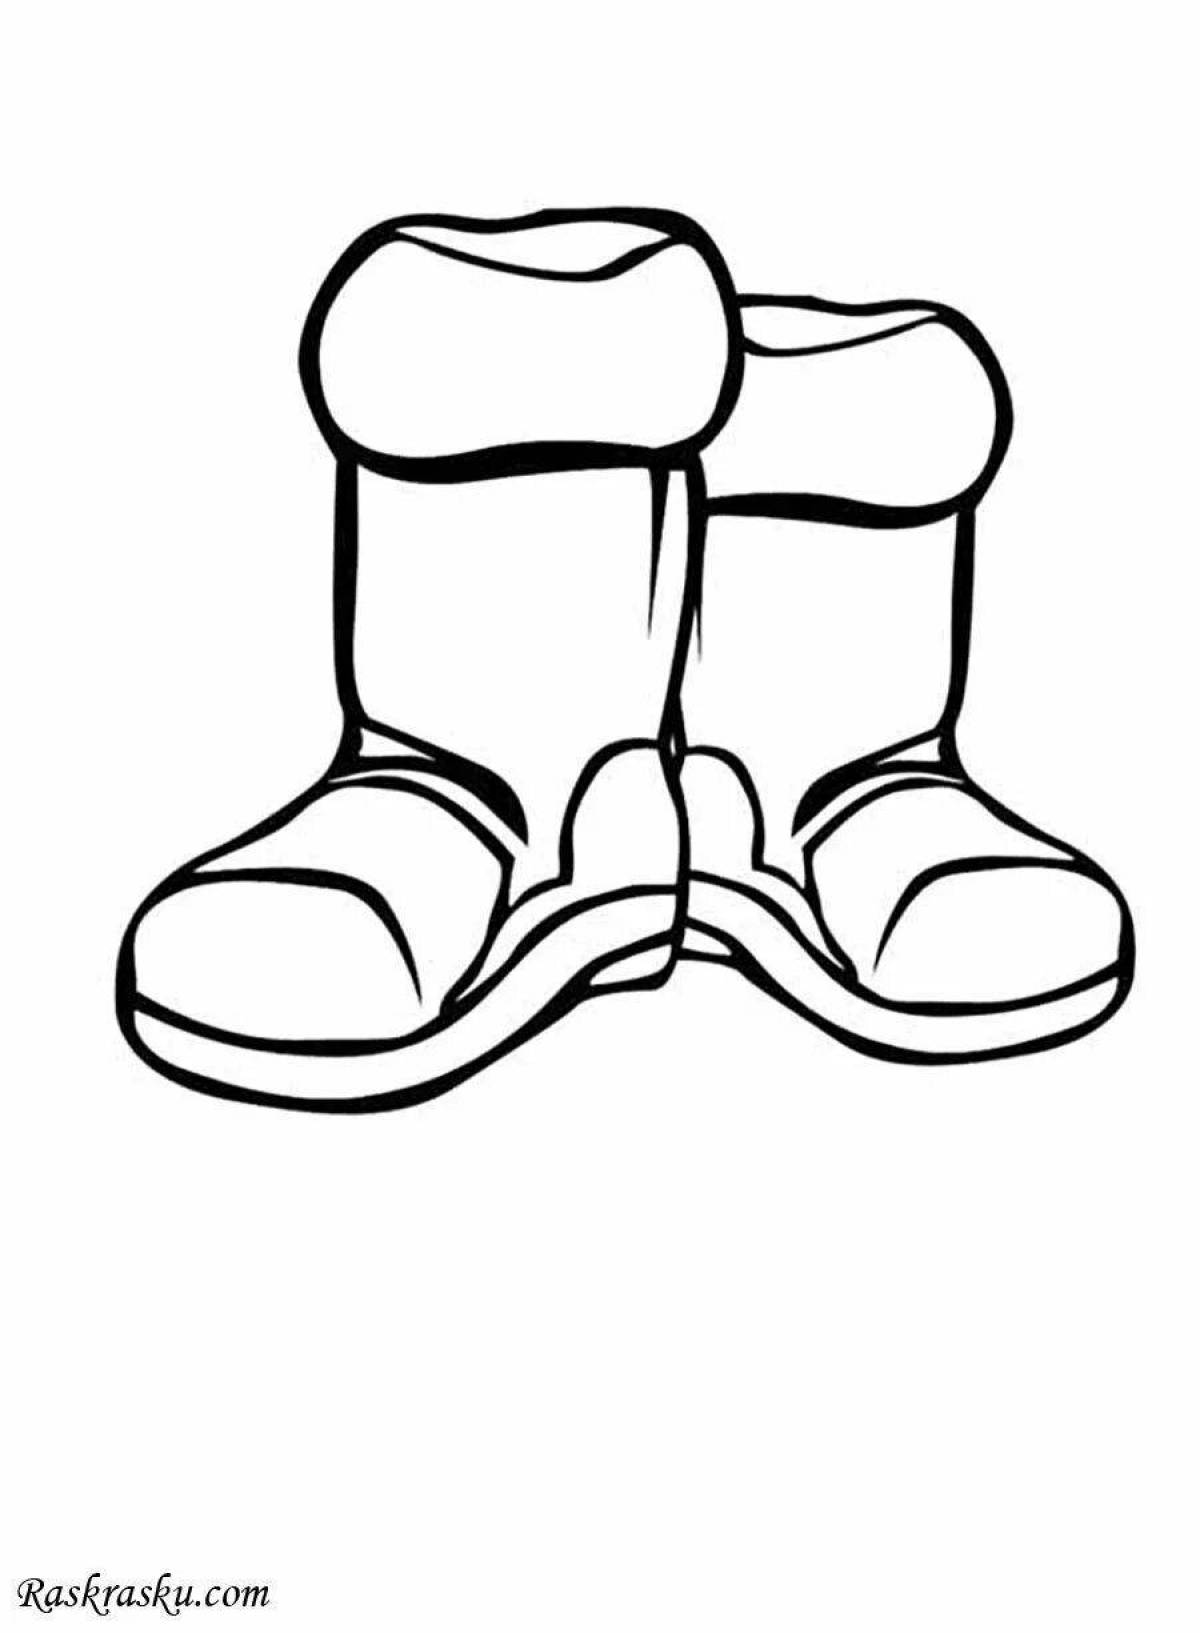 Jovial winter boots coloring page